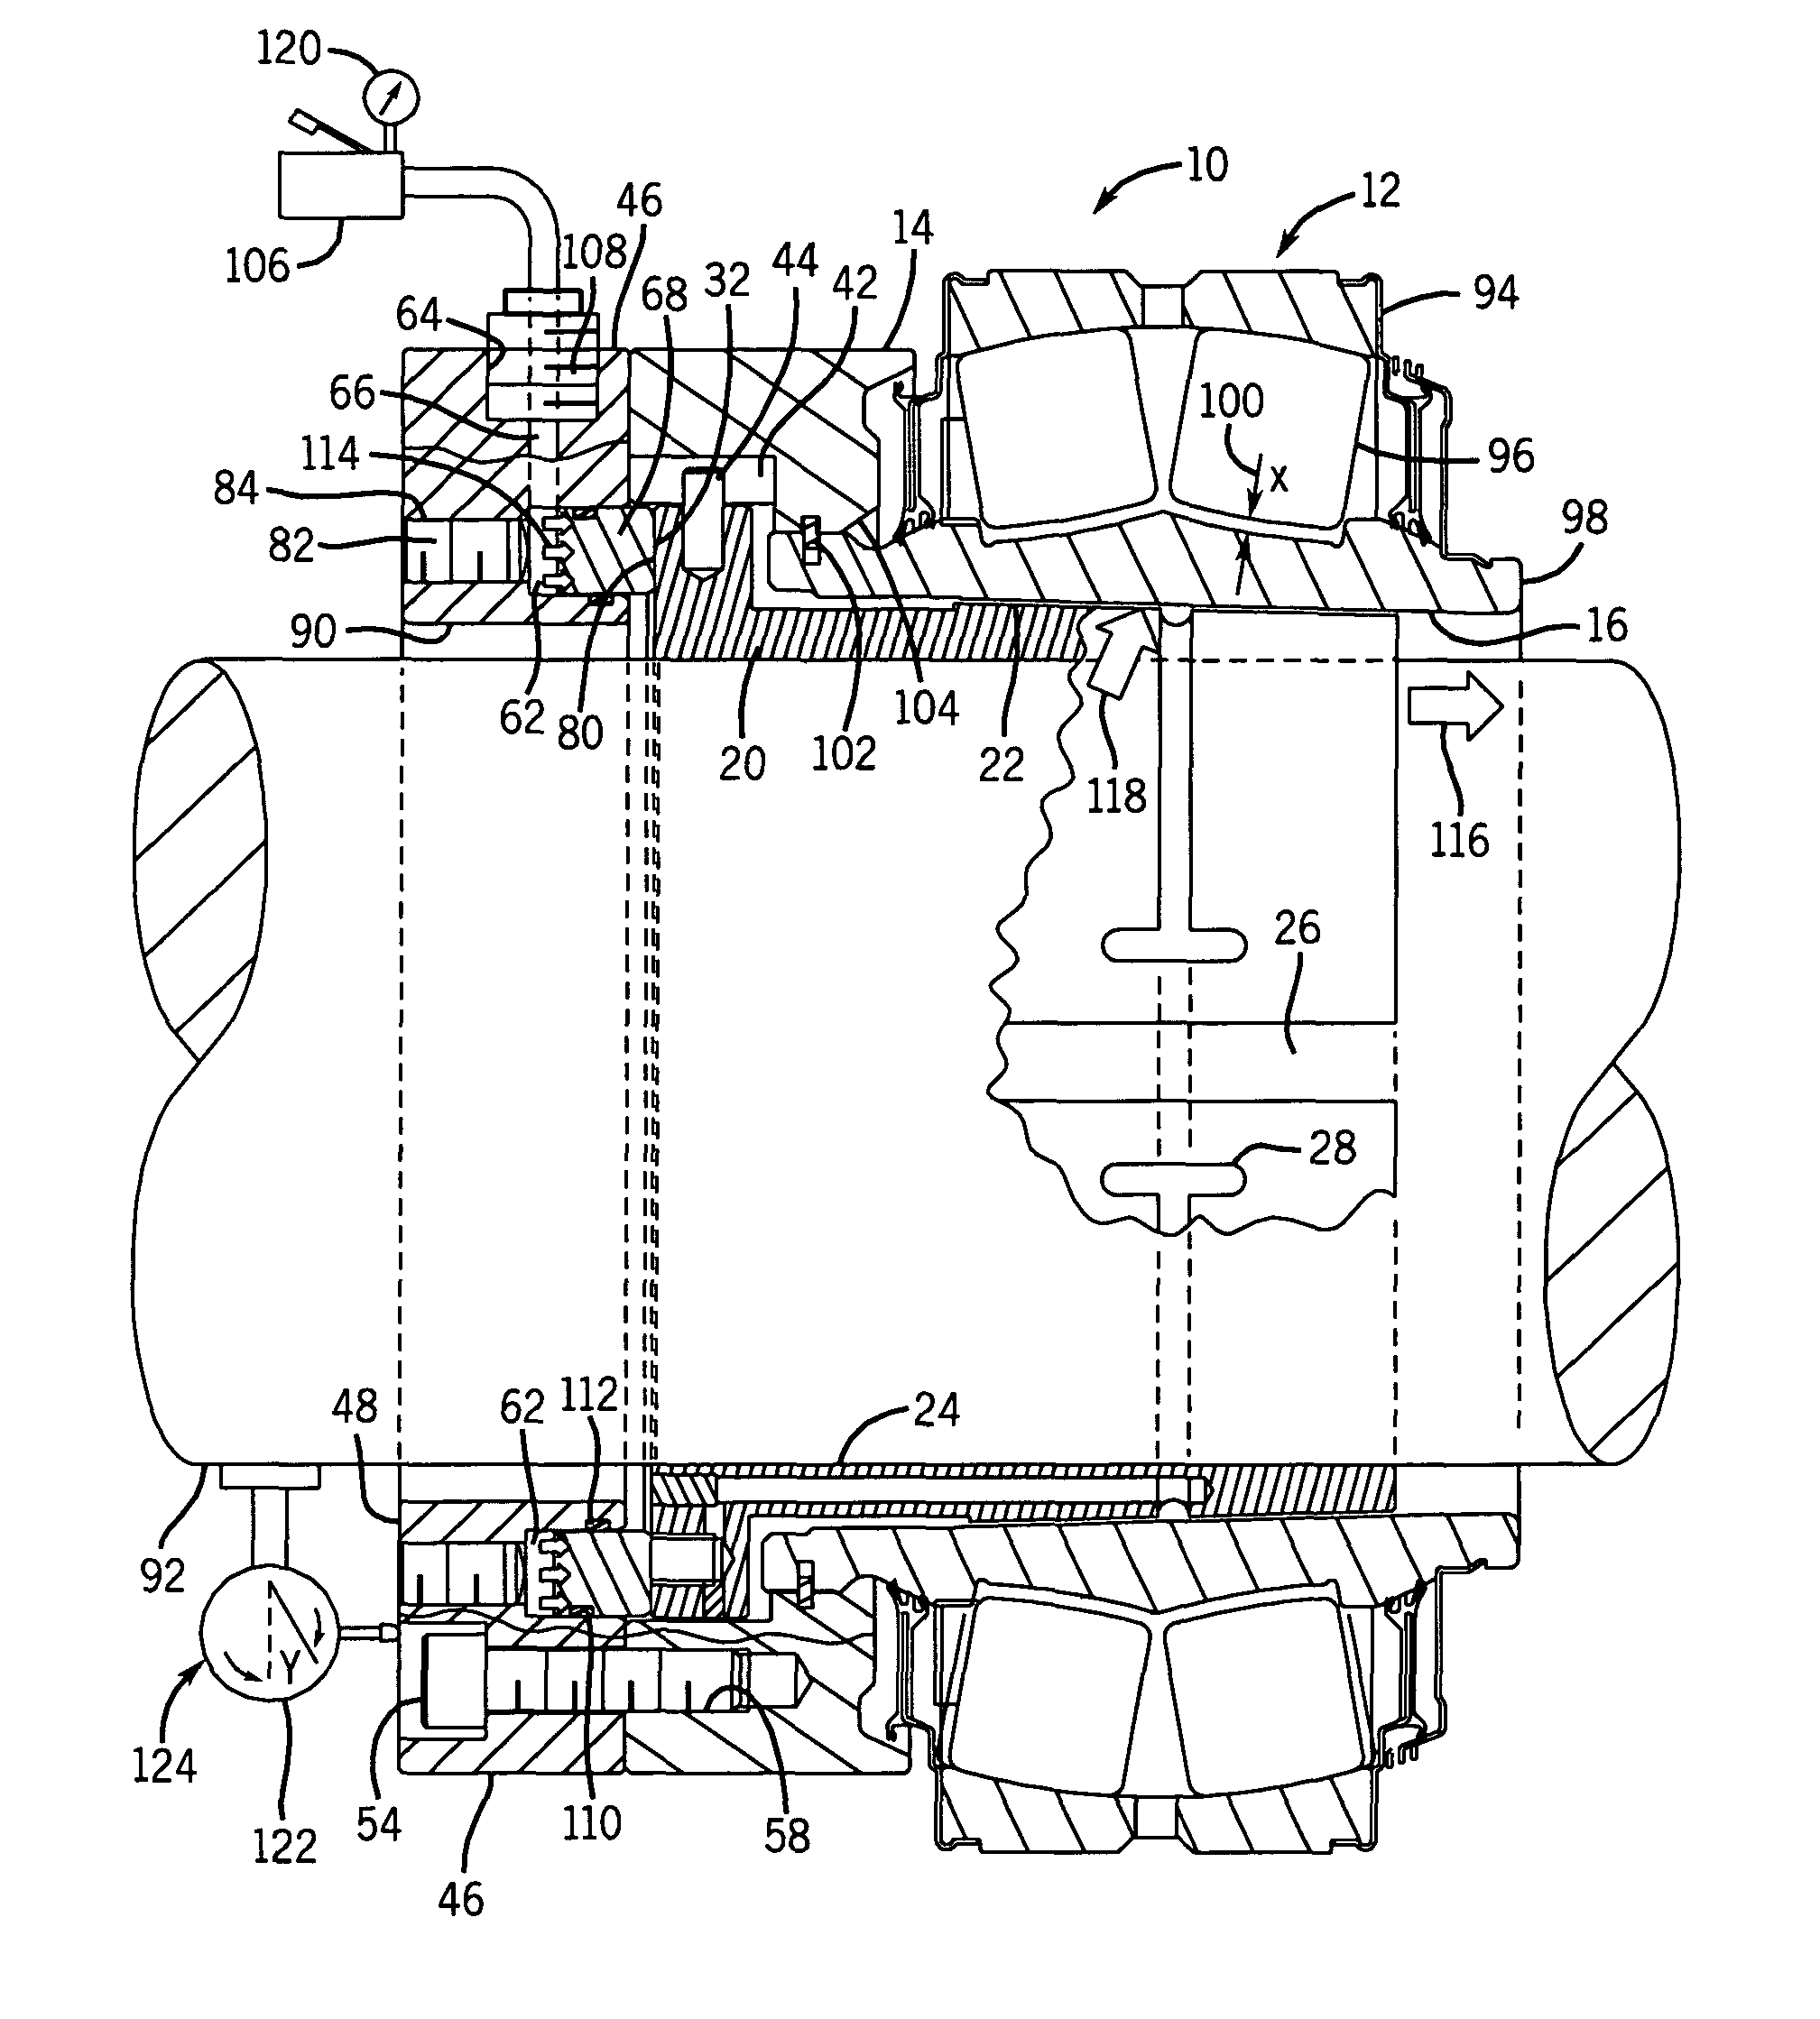 Hydraulically positioned shaft bearing attachment system and method